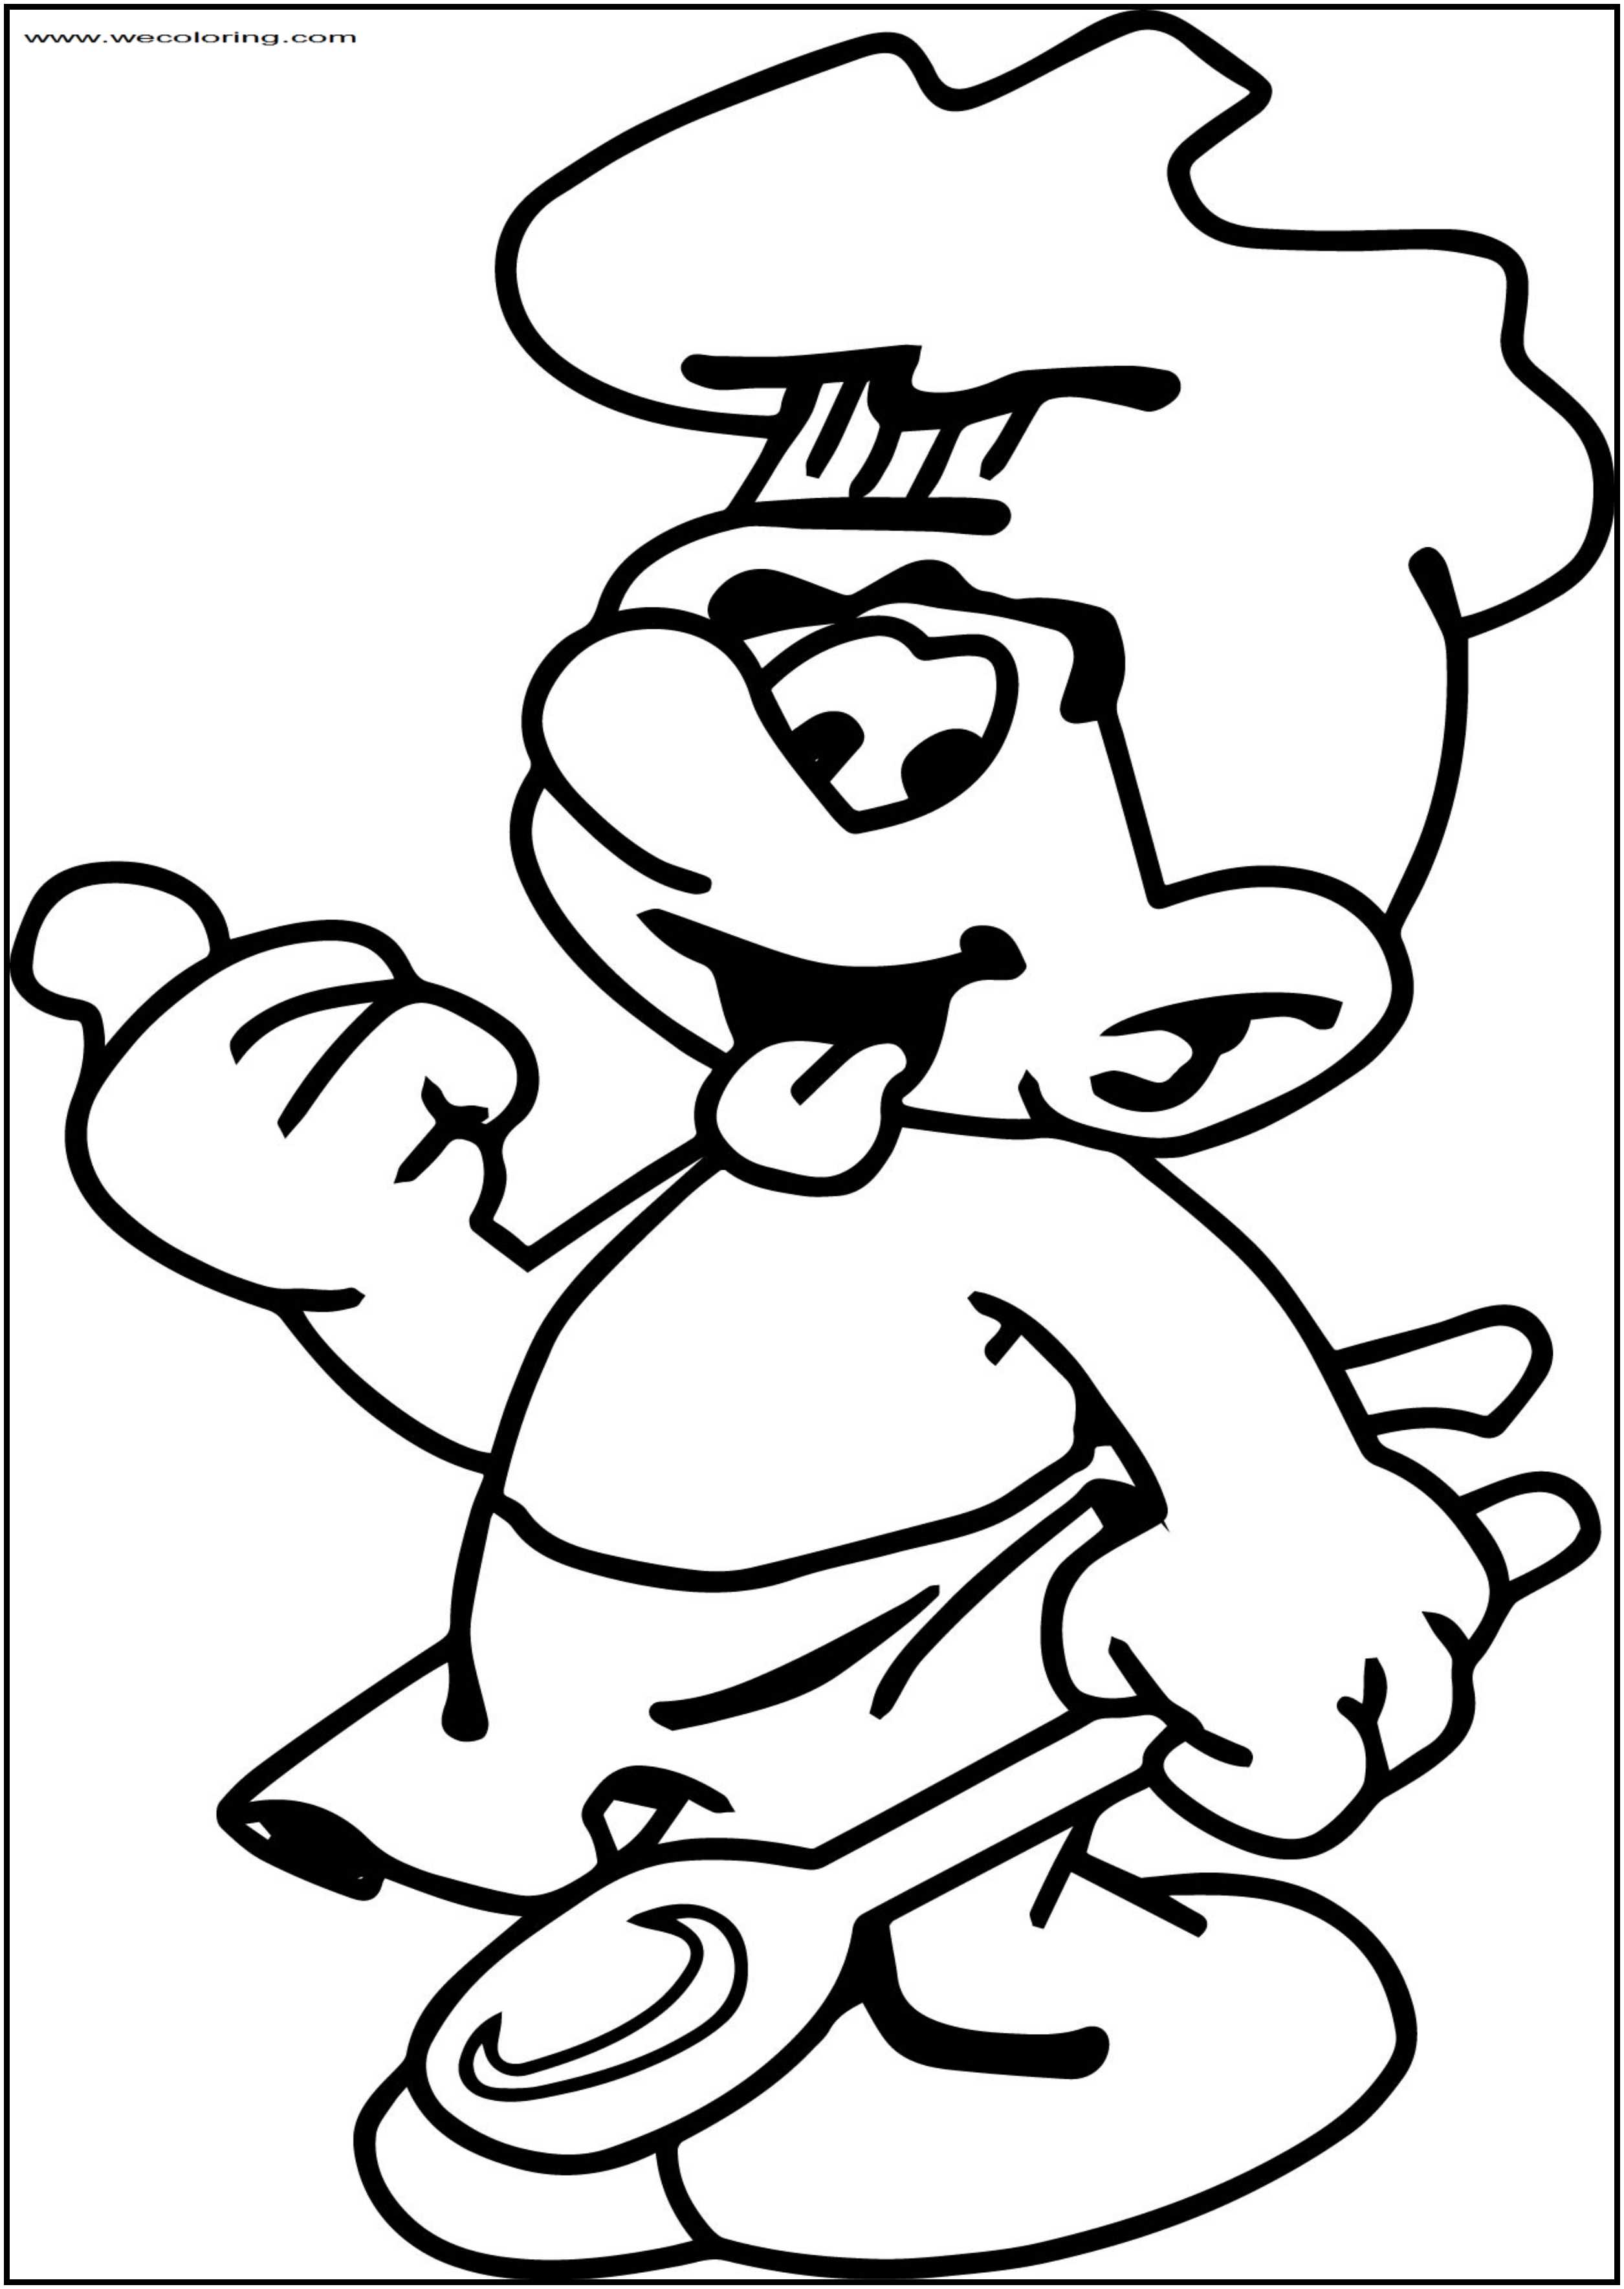 Baker Smurf Free Printable Coloring Page | Wecoloring